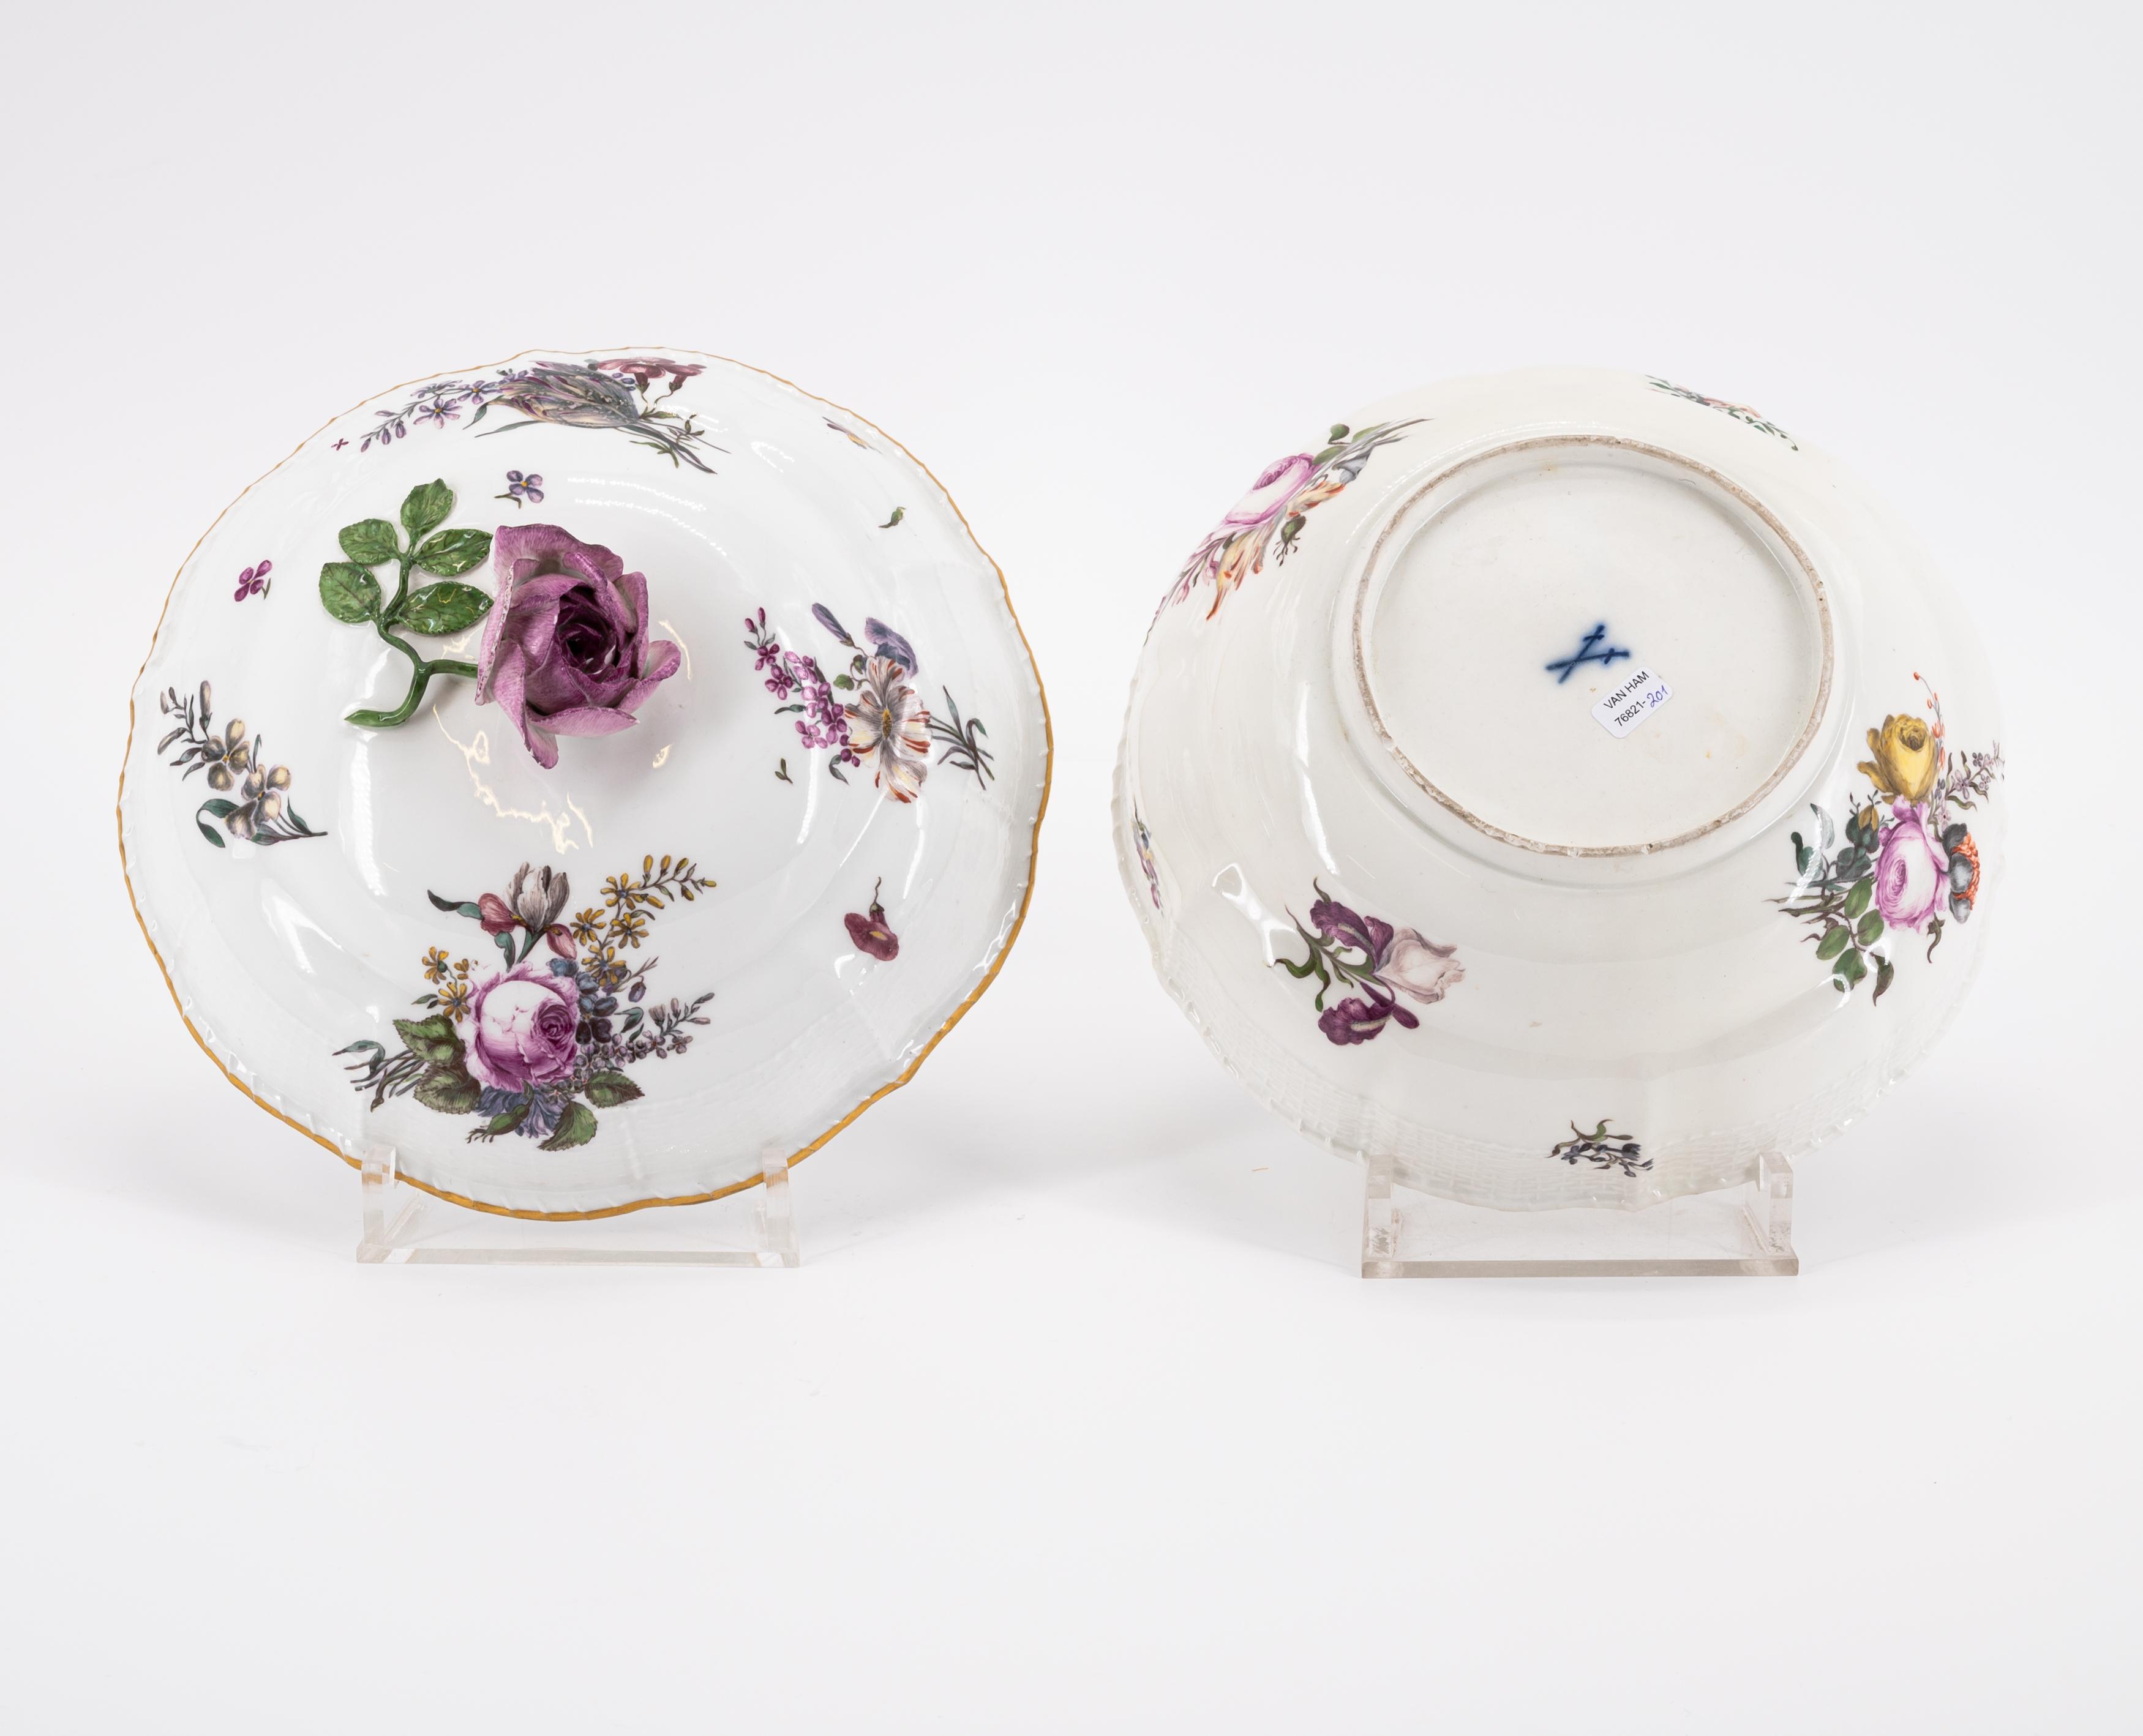 LARGE PORCELAIN LIDDED BOWL WITH FLOWER KNOB, SMALL TEA POT WITH WOODCUT FLOWERS AND CUP WITH SAUCER - Image 6 of 18